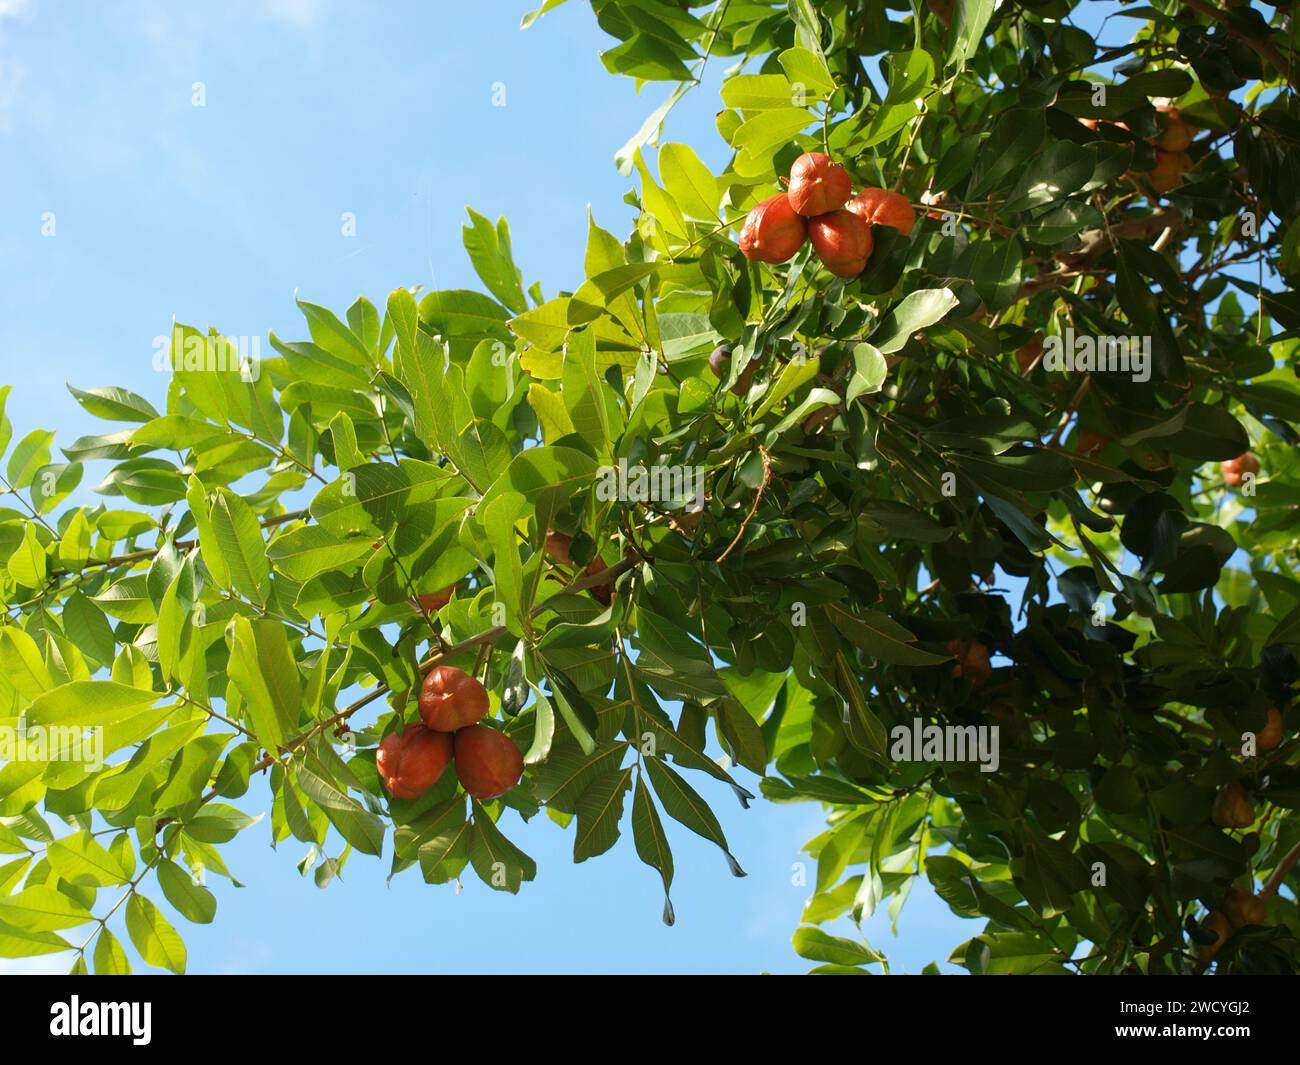 Ackee tree with fruits. Jamaican national fruit. Wide shot. Stock Photo